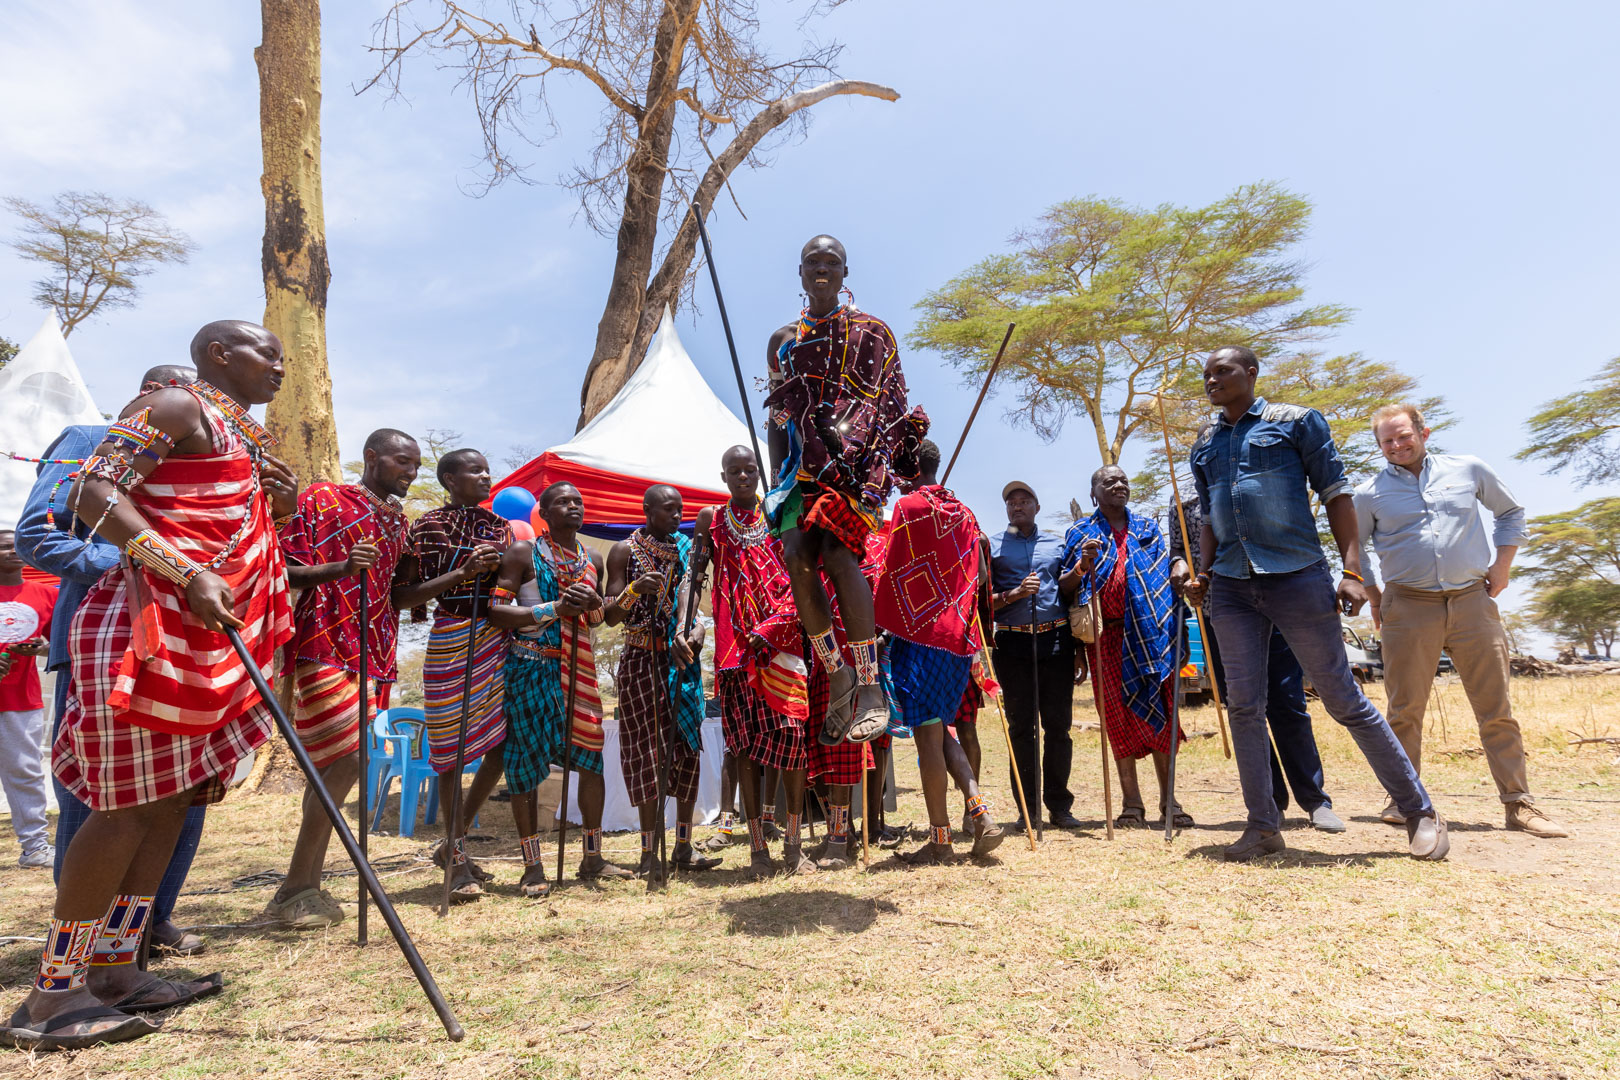 What's a Maasai celebration without jumping?